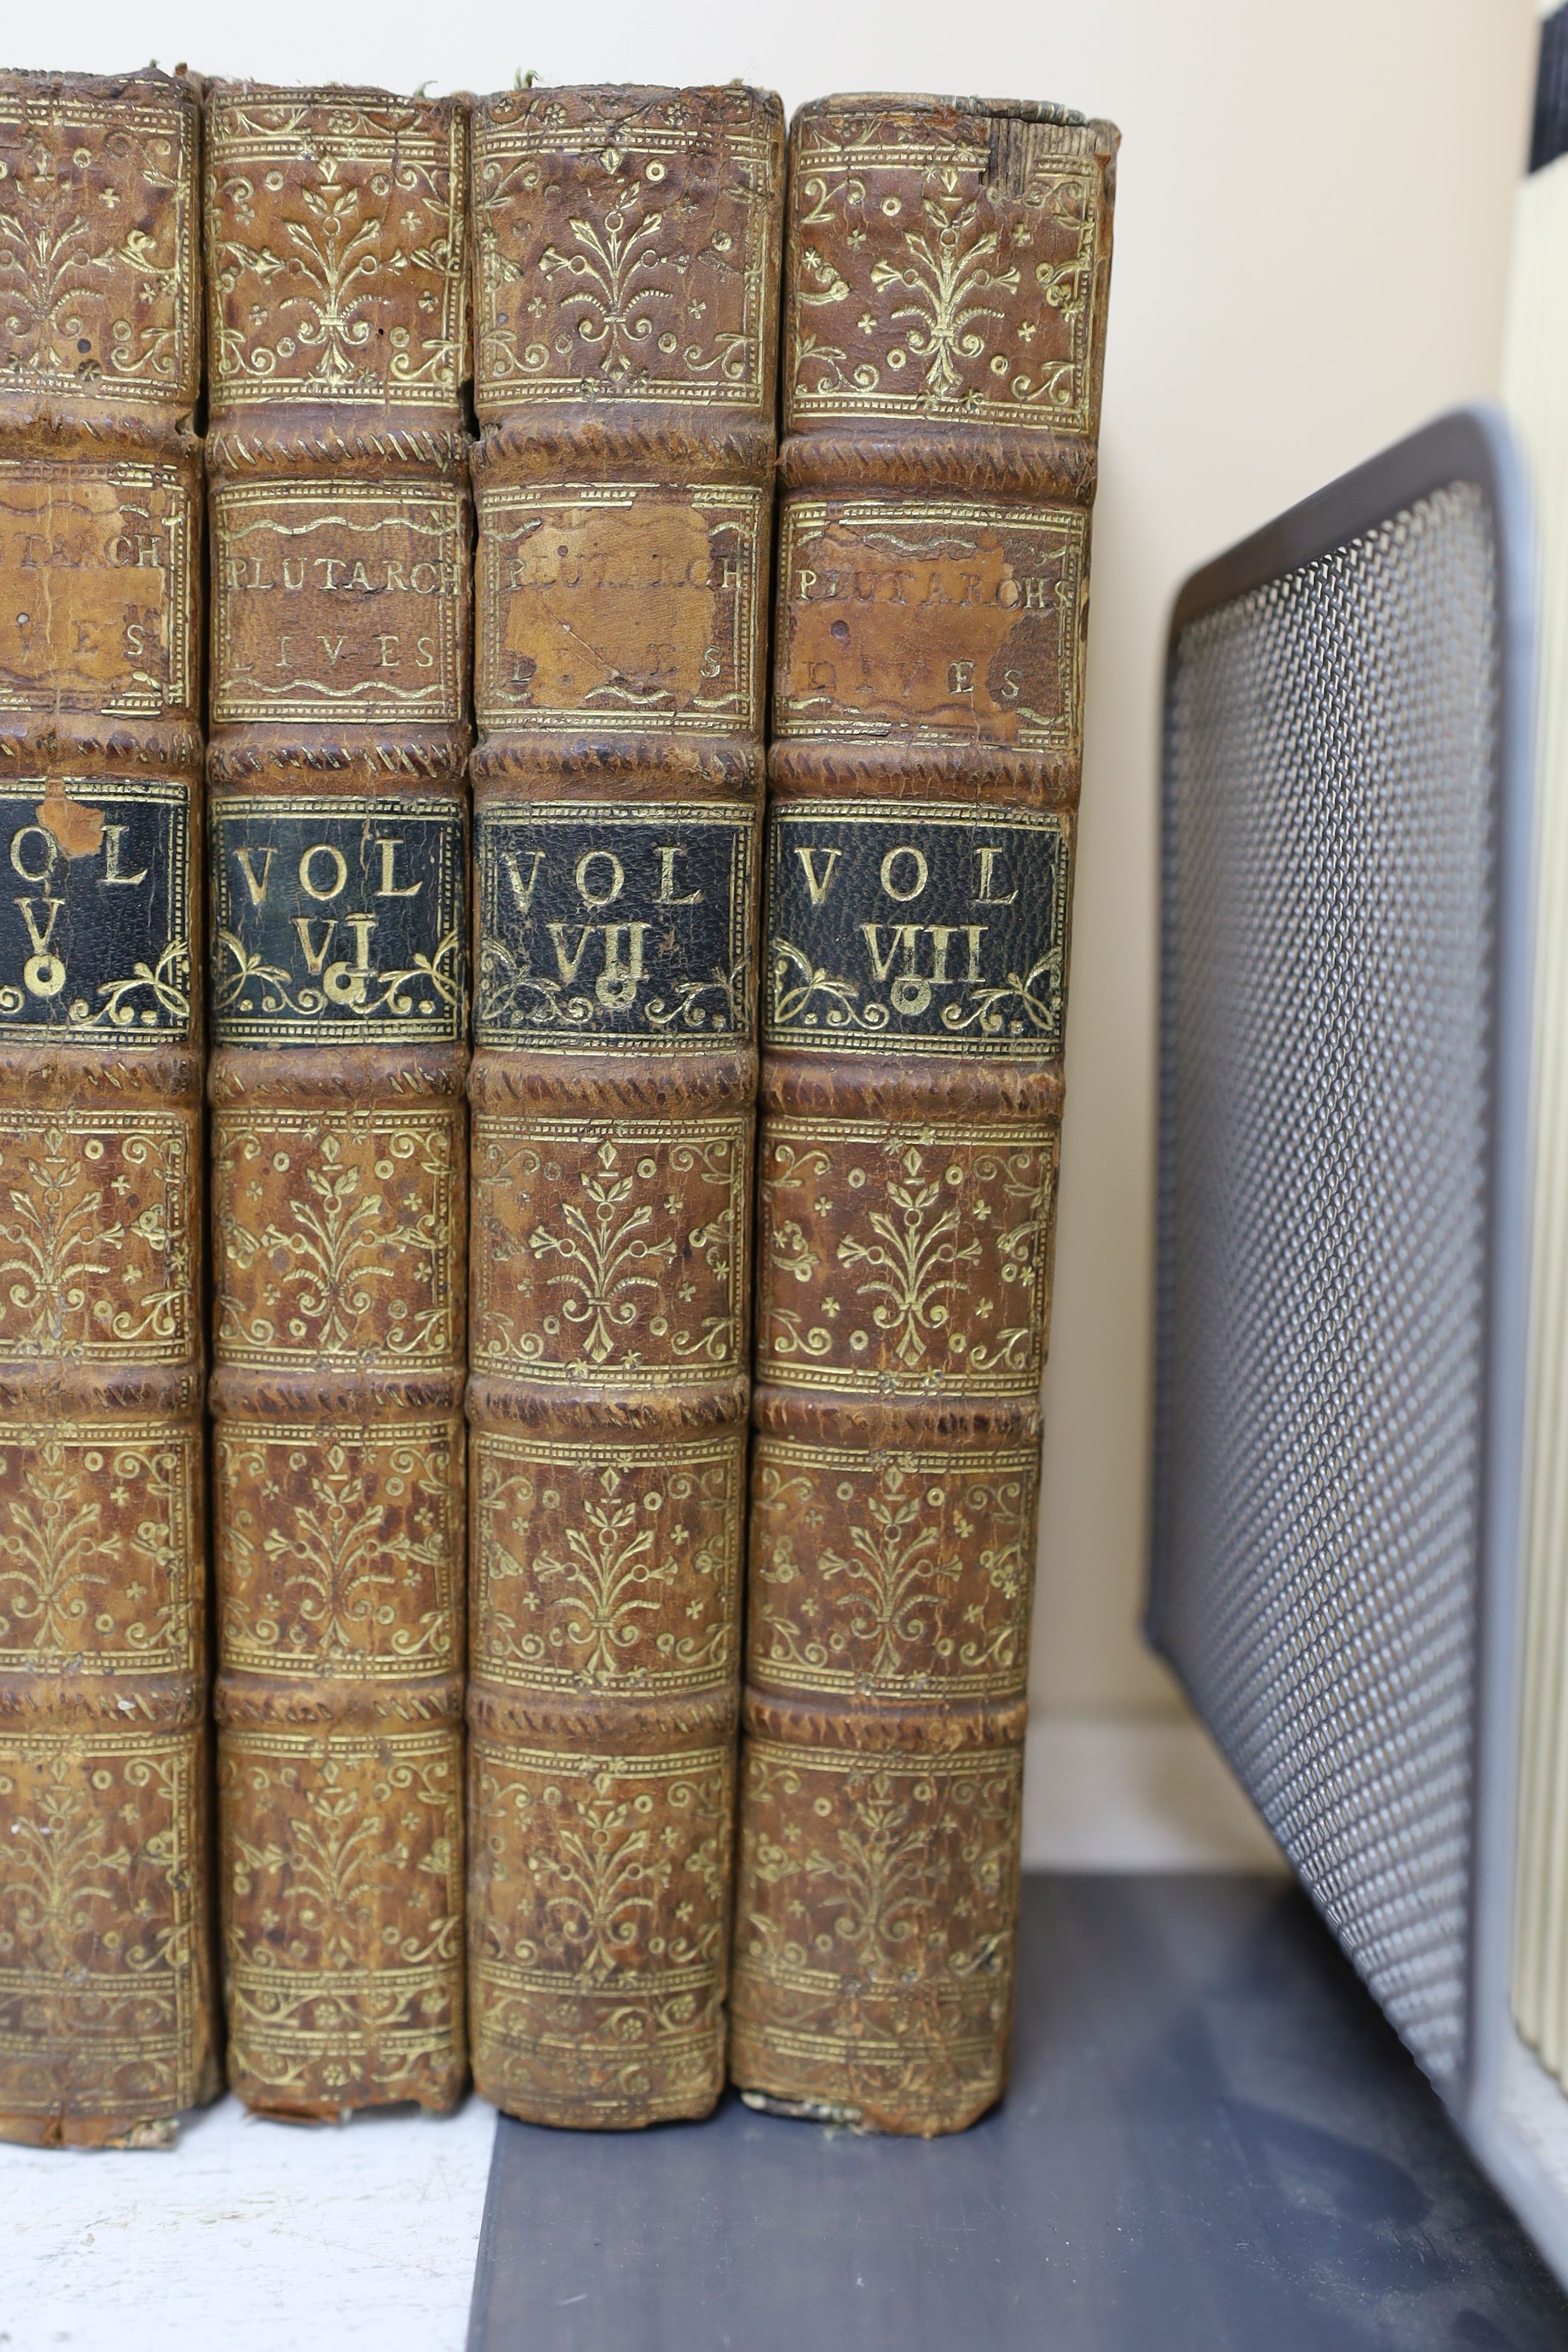 Plutarch- Lives, 8 vols, 8vo, contemporary calf, some titling labels lacking, London, 1727